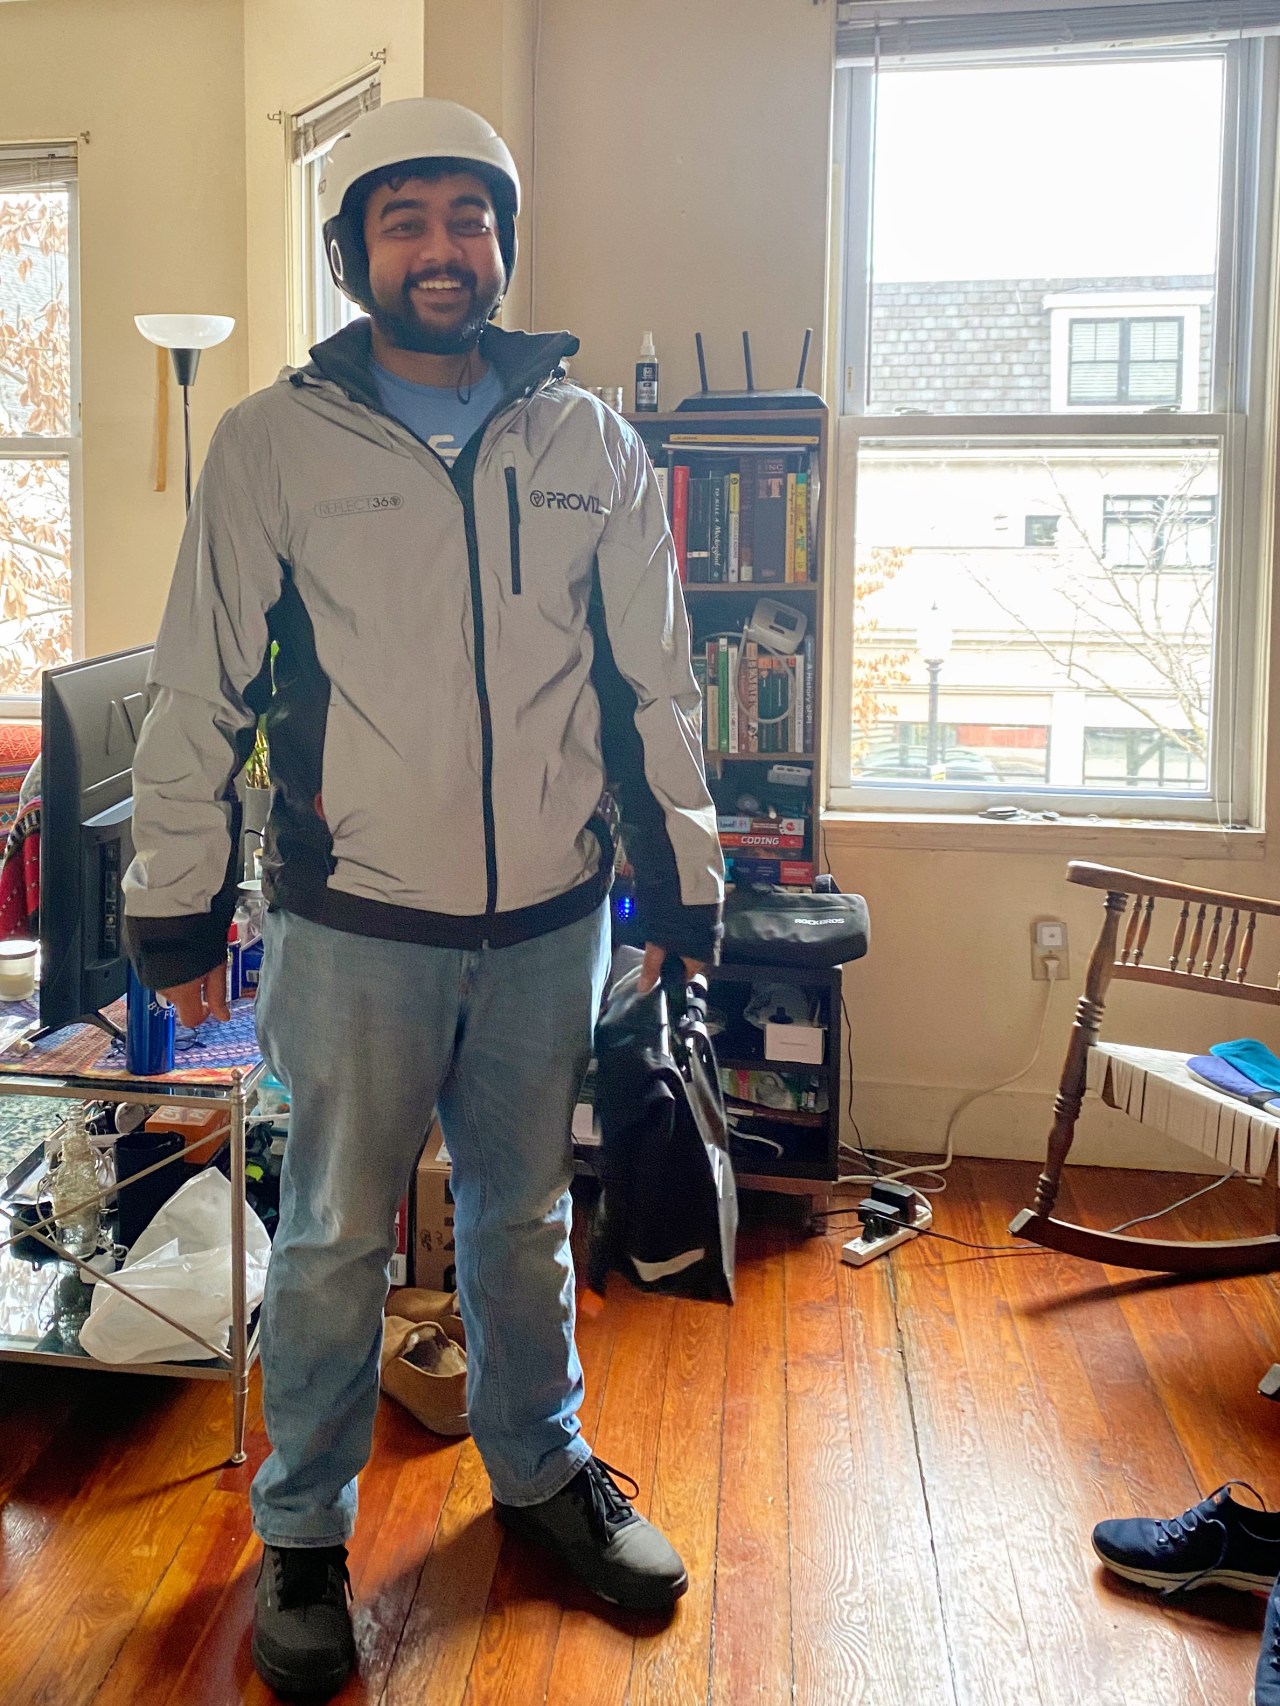 Deodhar poses after putting on his biking gear which includes a helmet with cushioned side flaps to keep his ears warm during the winter, a reflective jacket for visibility and a saddle bar he can hang from the bike’s reach rack.